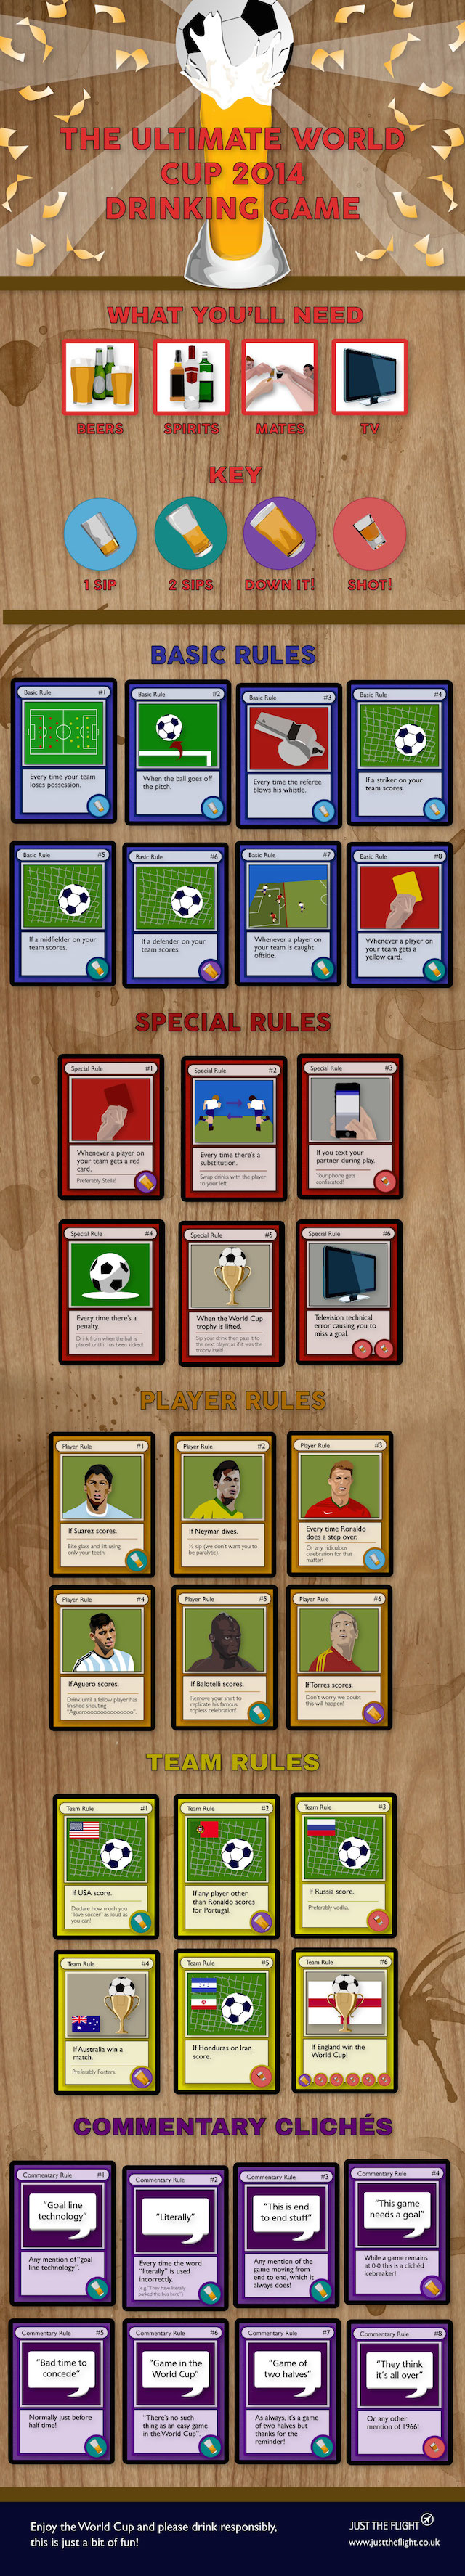 world-cup-2014-drinking-game